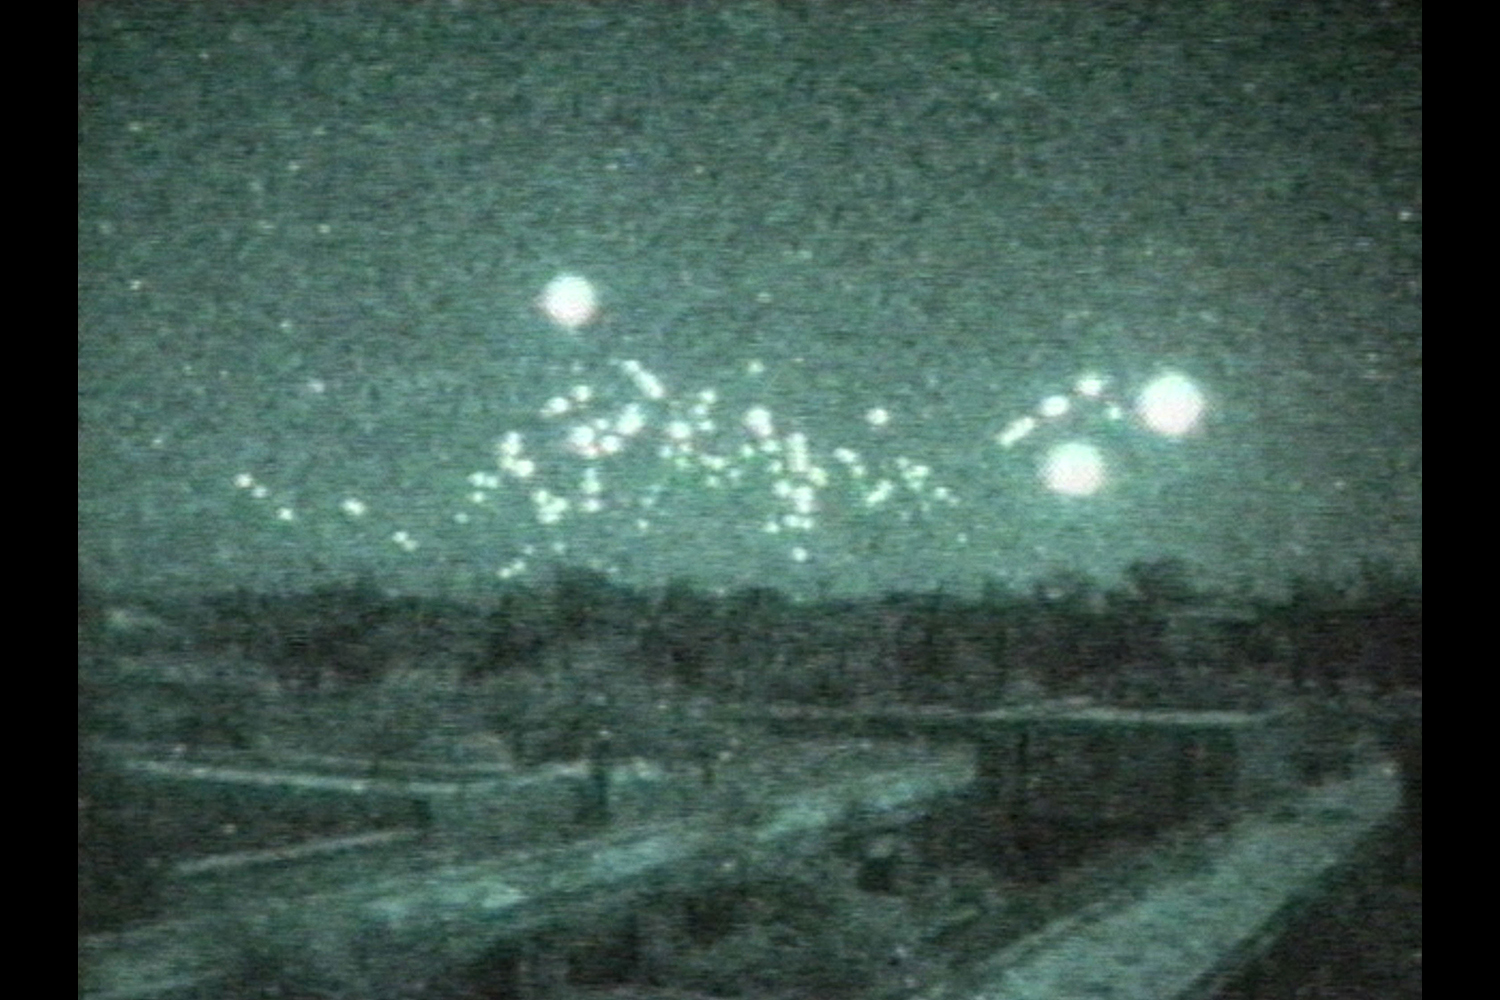 This image taken from a low-light video camera shows tracer-fire from antiaircraft guns on February 22, 1991 in Baghdad, Iraq. The video was shot from the hotel room of CNN correspondents who remained in Baghdad during the Gulf War.